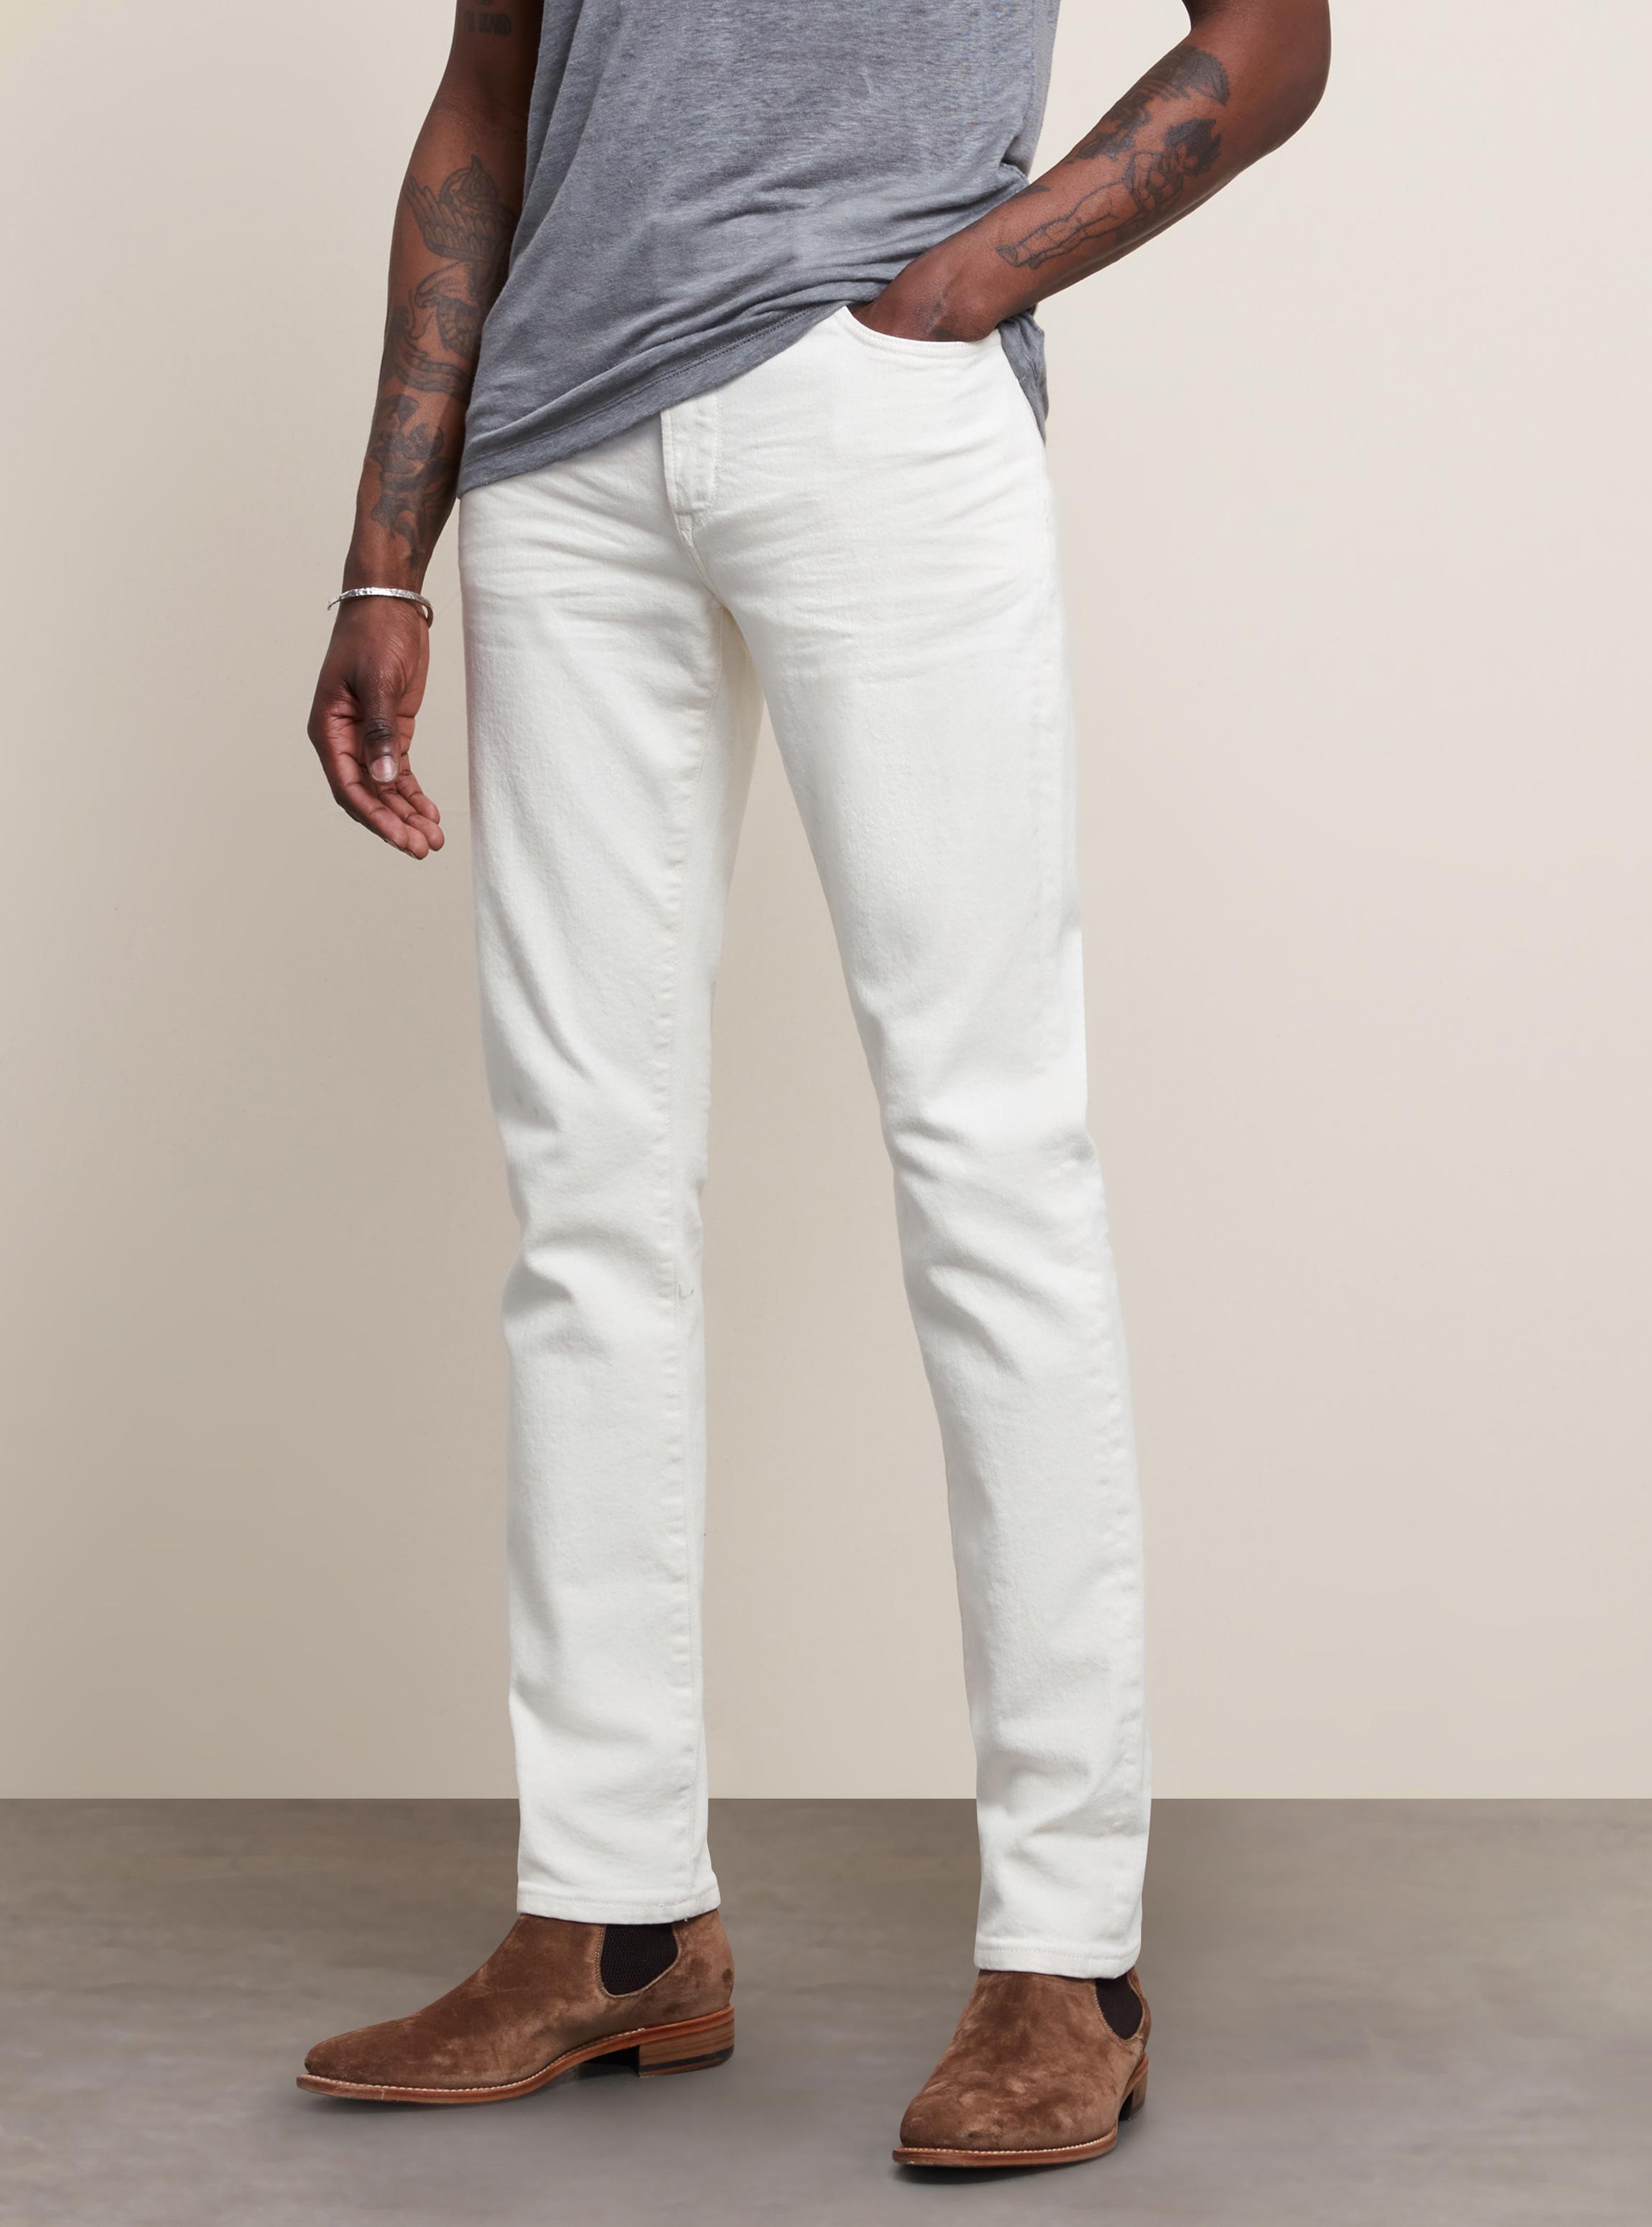 WIGHT SKINNY STRAIGHT FIT JEAN - HARPER WASH image number 1